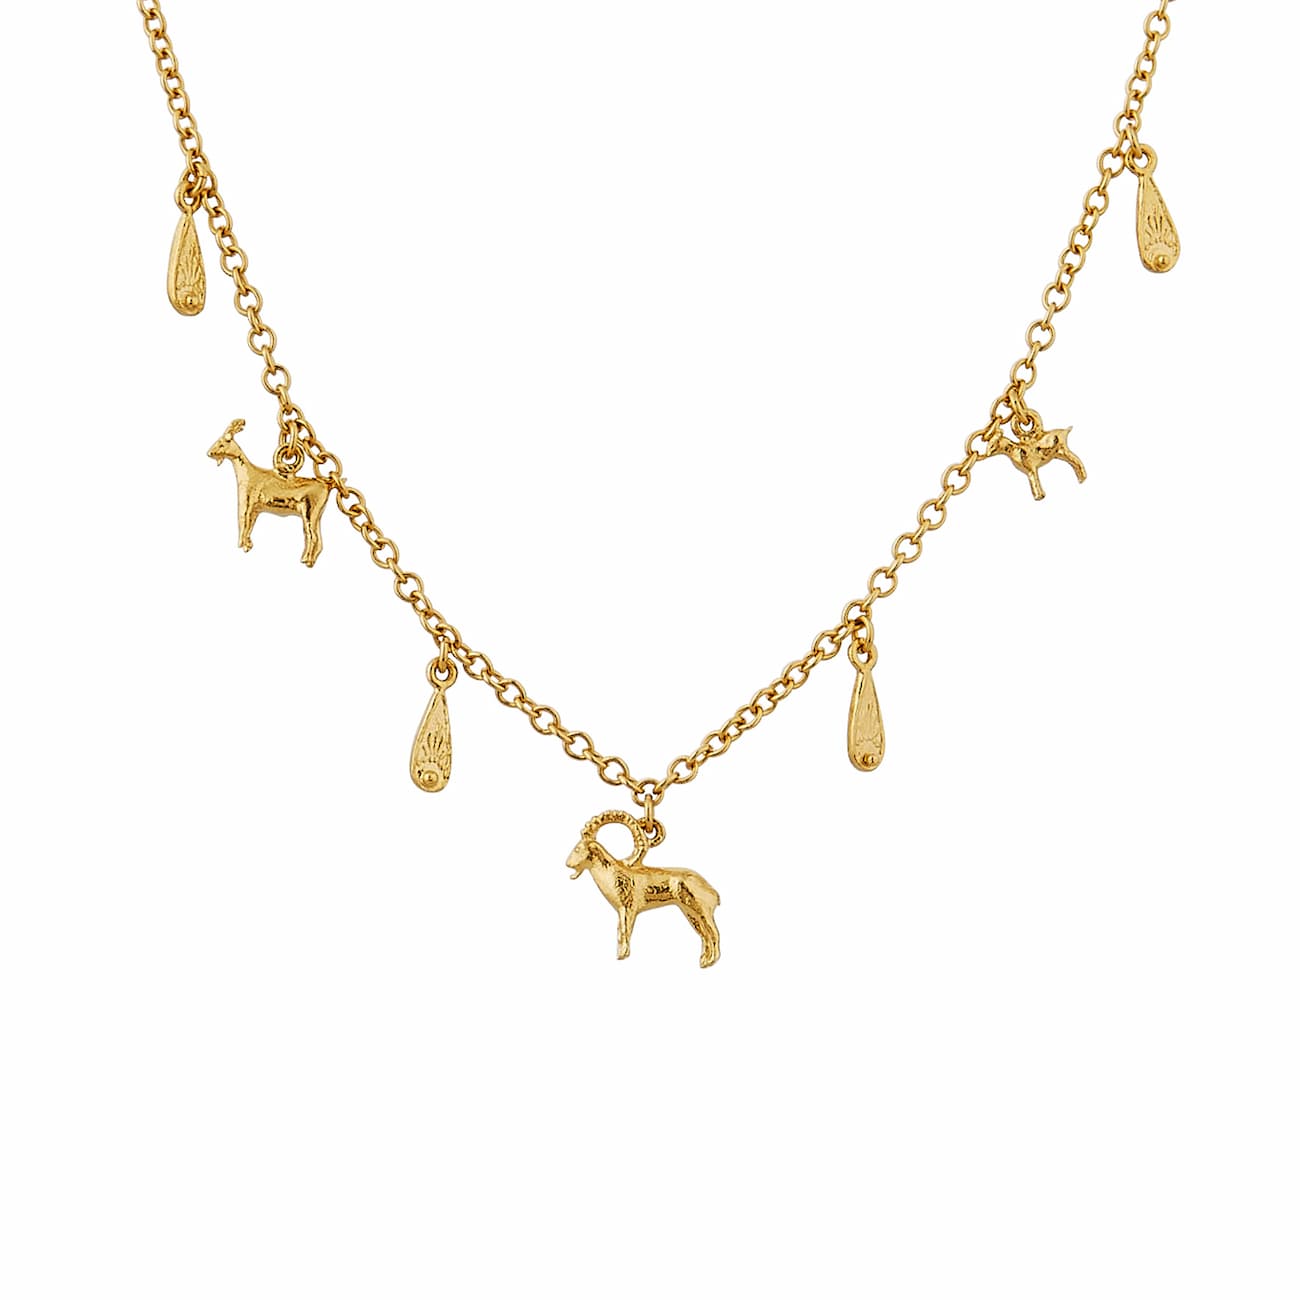 Mountain Goat Family Necklace with Ornate Drops